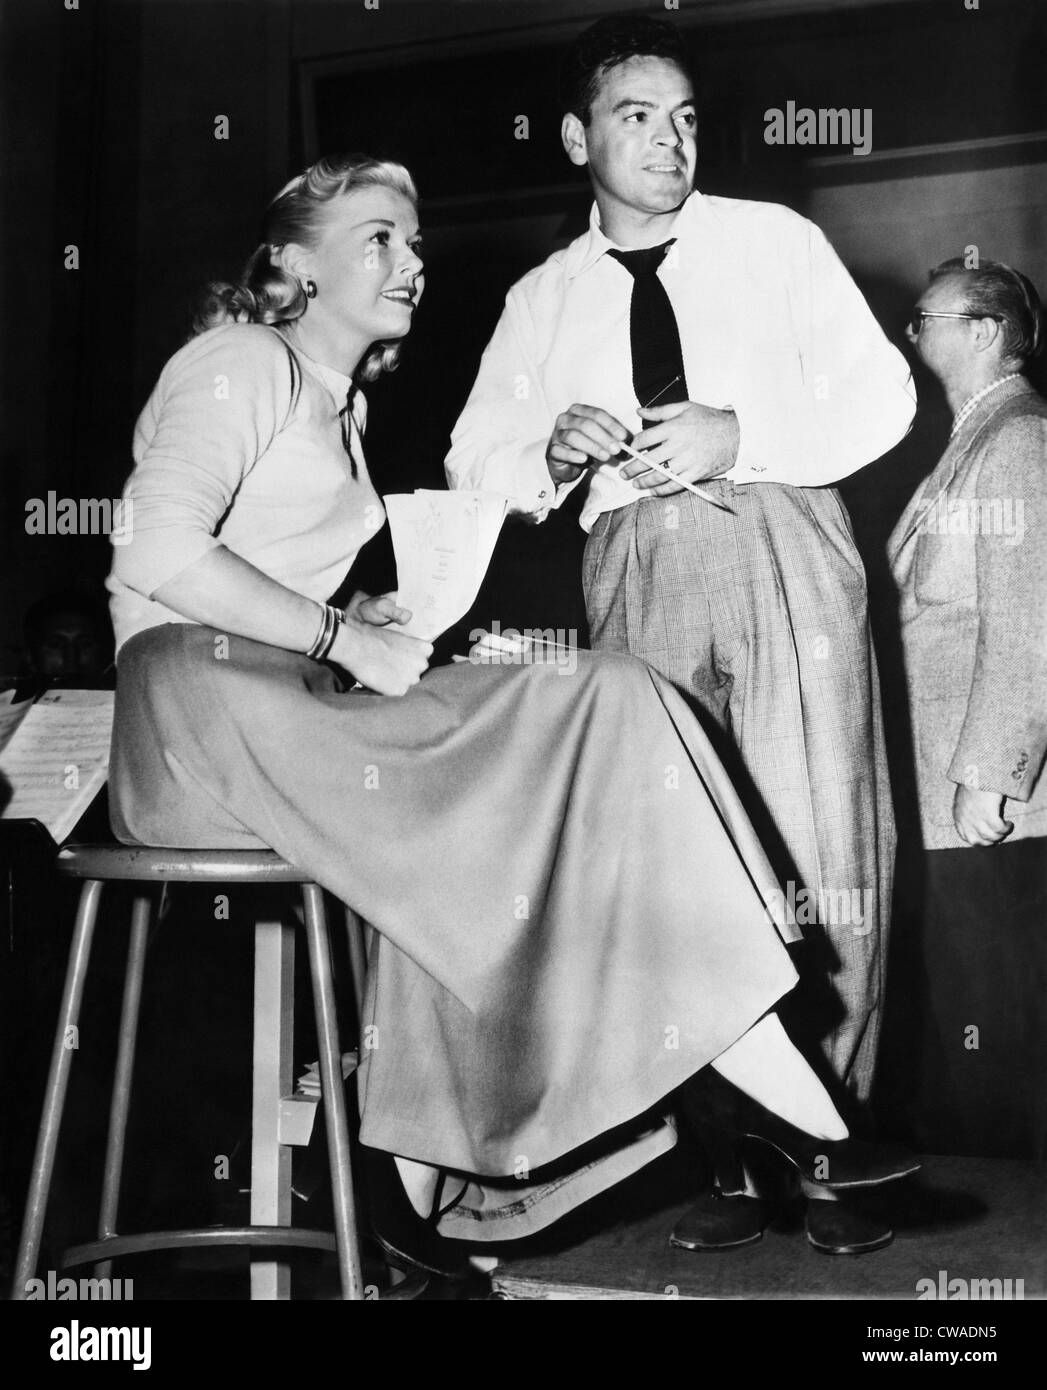 Bandleader Les Brown (holding pencil) with the band's female singer Doris Day (left), ca. late 1940s. Courtesy: CSU Archives / Stock Photo